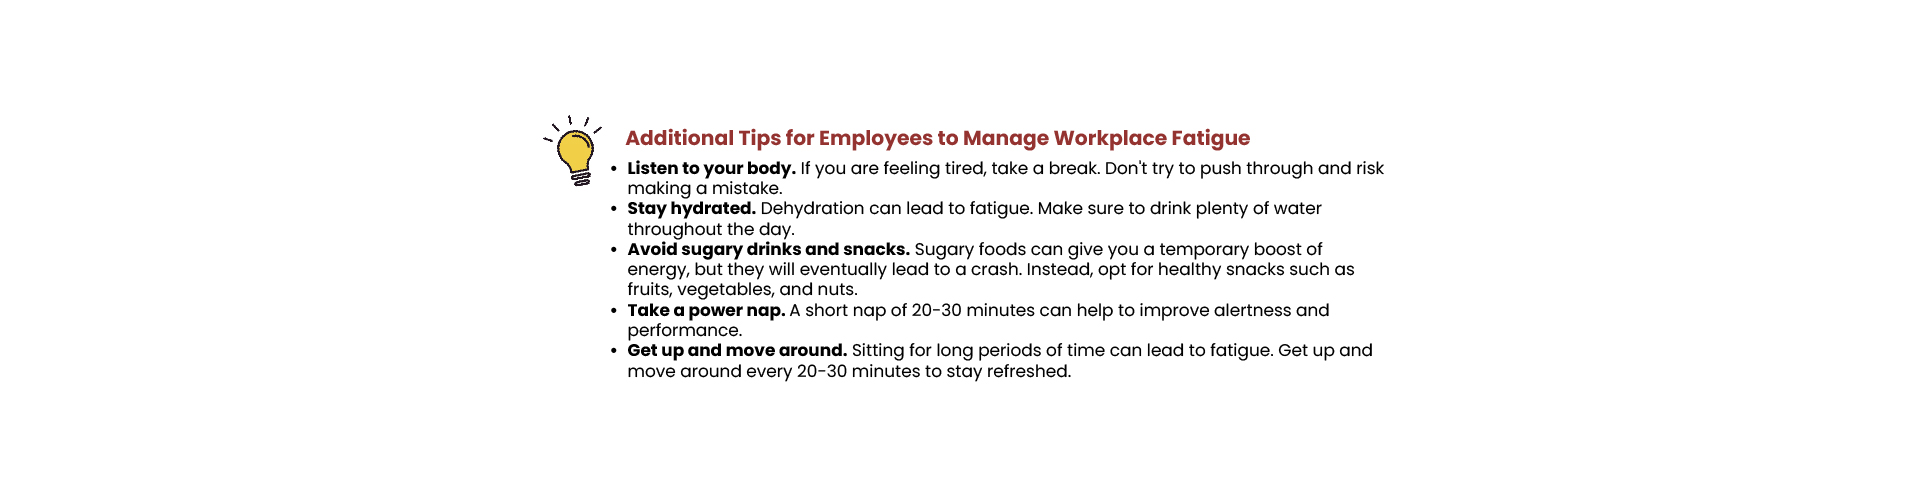 Additional Tips for Employees to Manage Workplace Fatigue